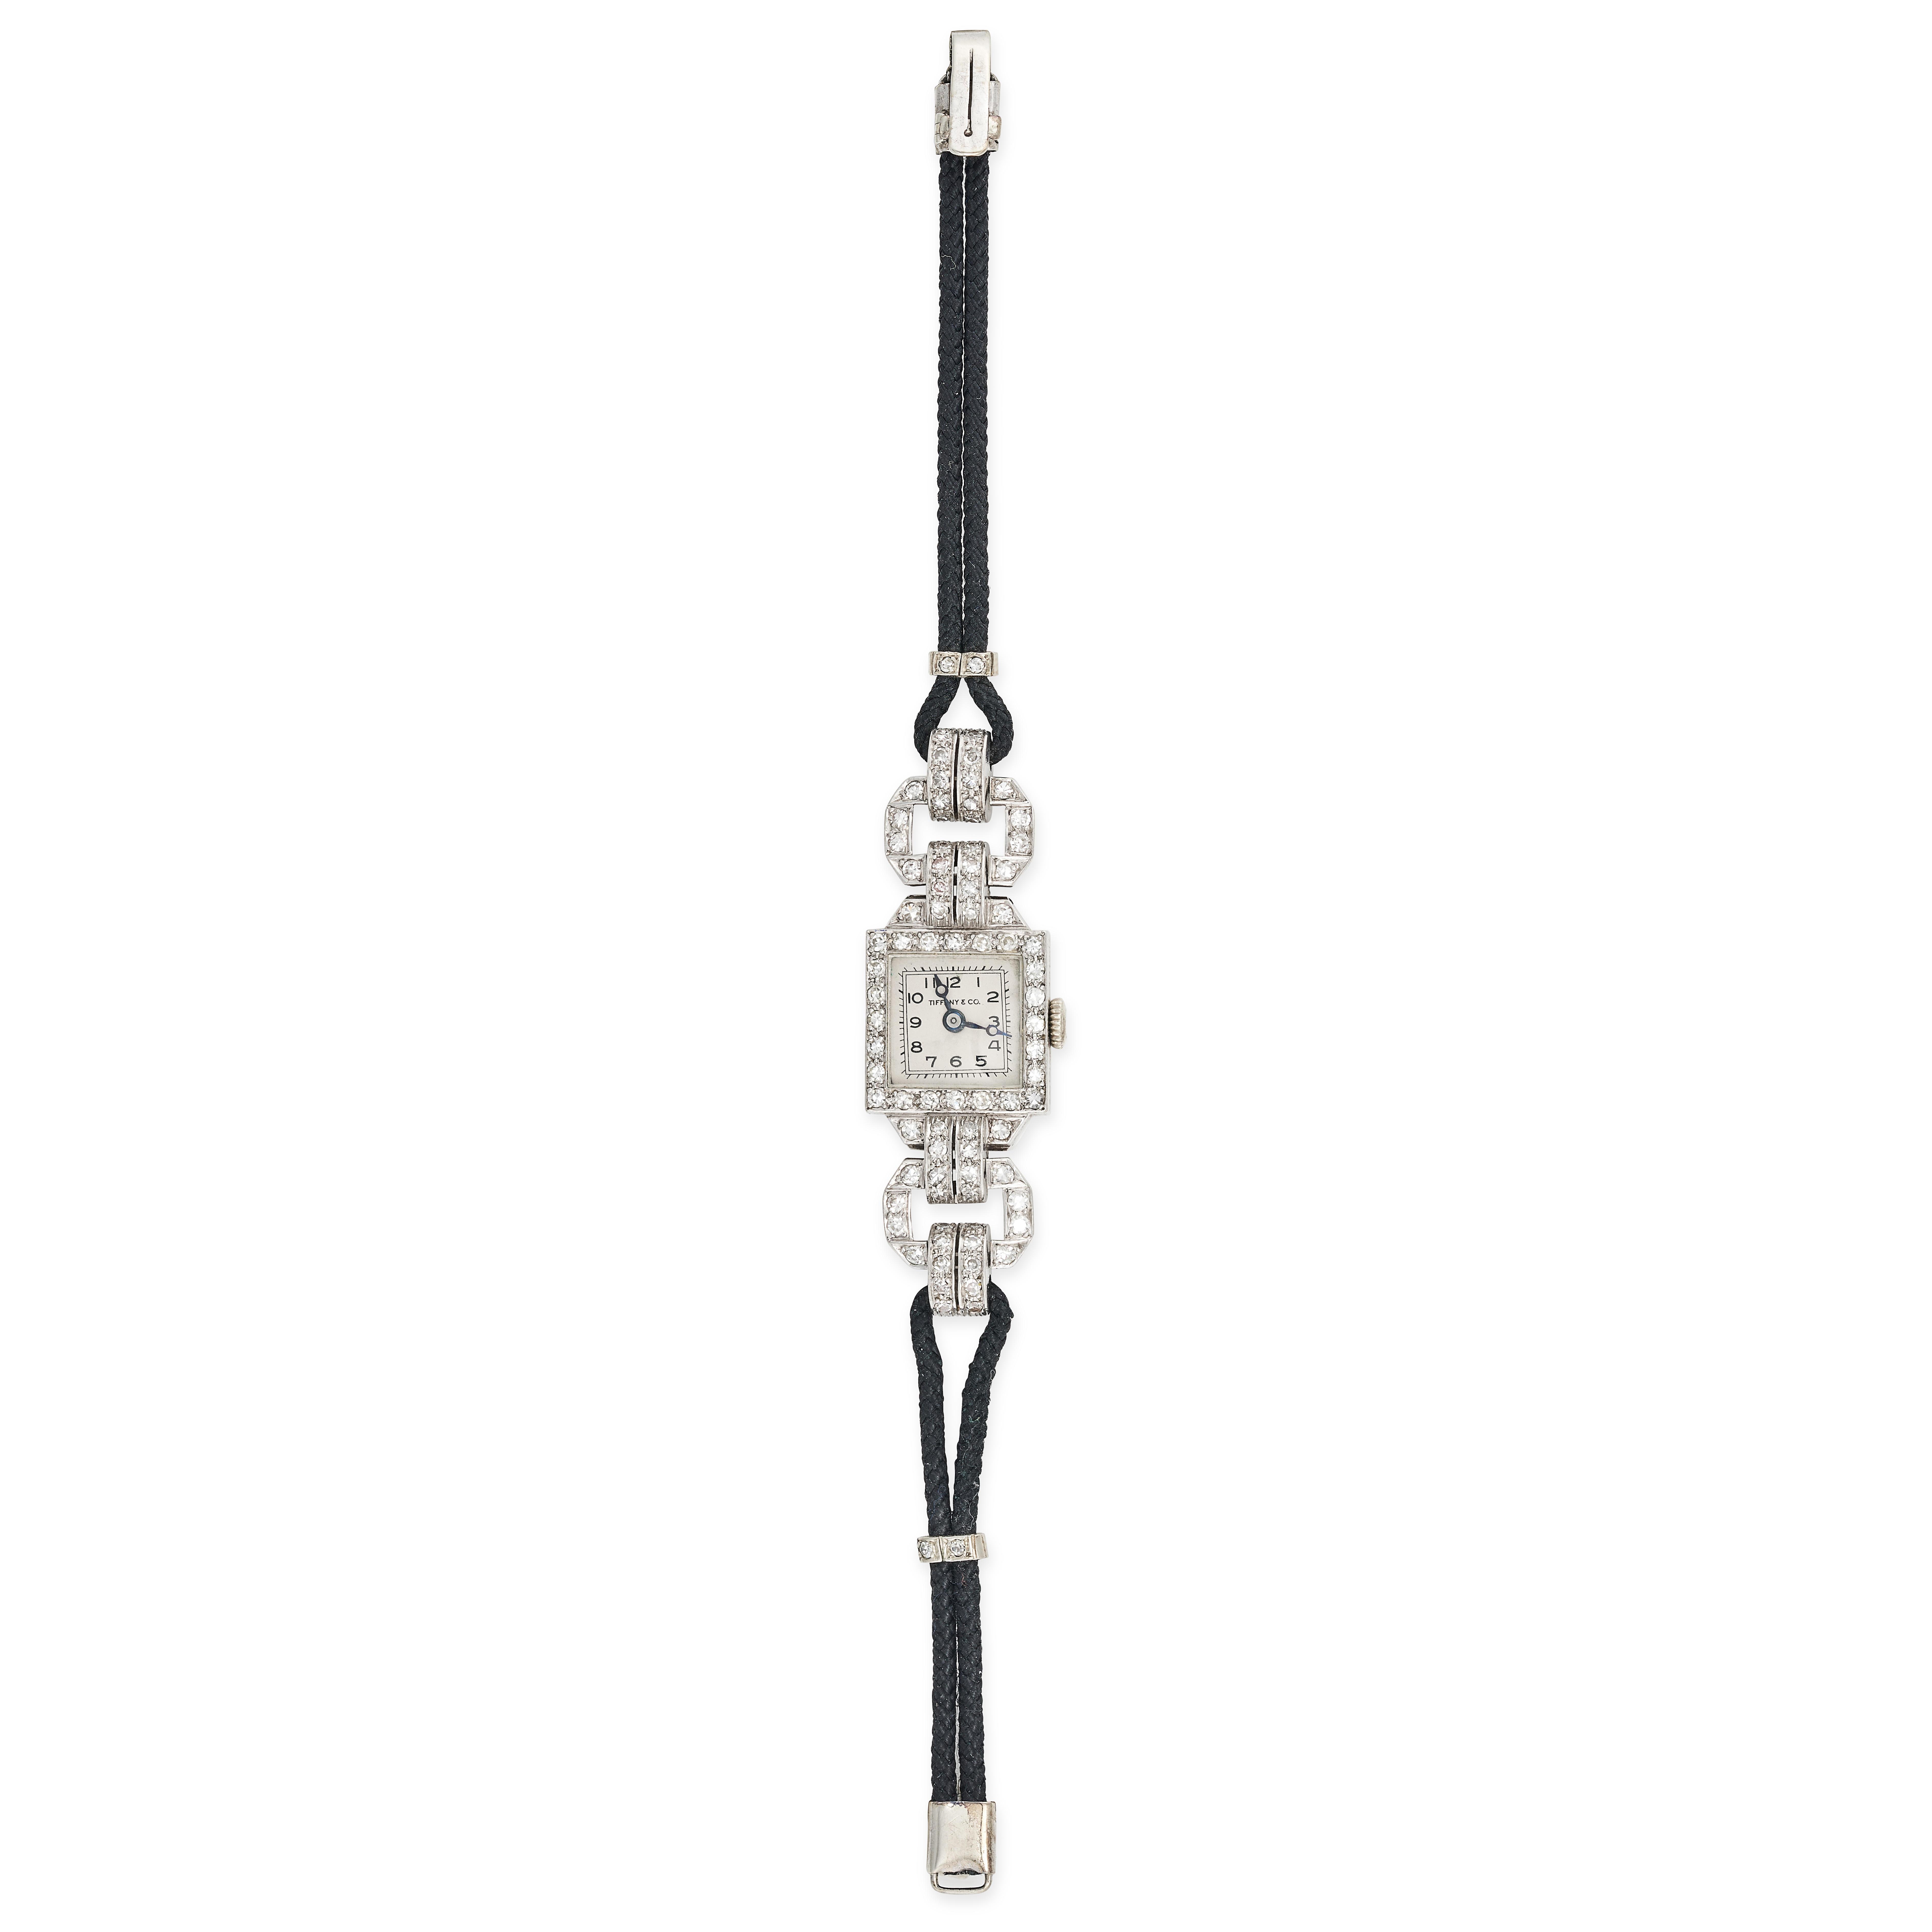 TIFFANY & CO., AN ART DECO DIAMOND COCKTAIL WATCH in 9ct white gold, the square watch face in a b...